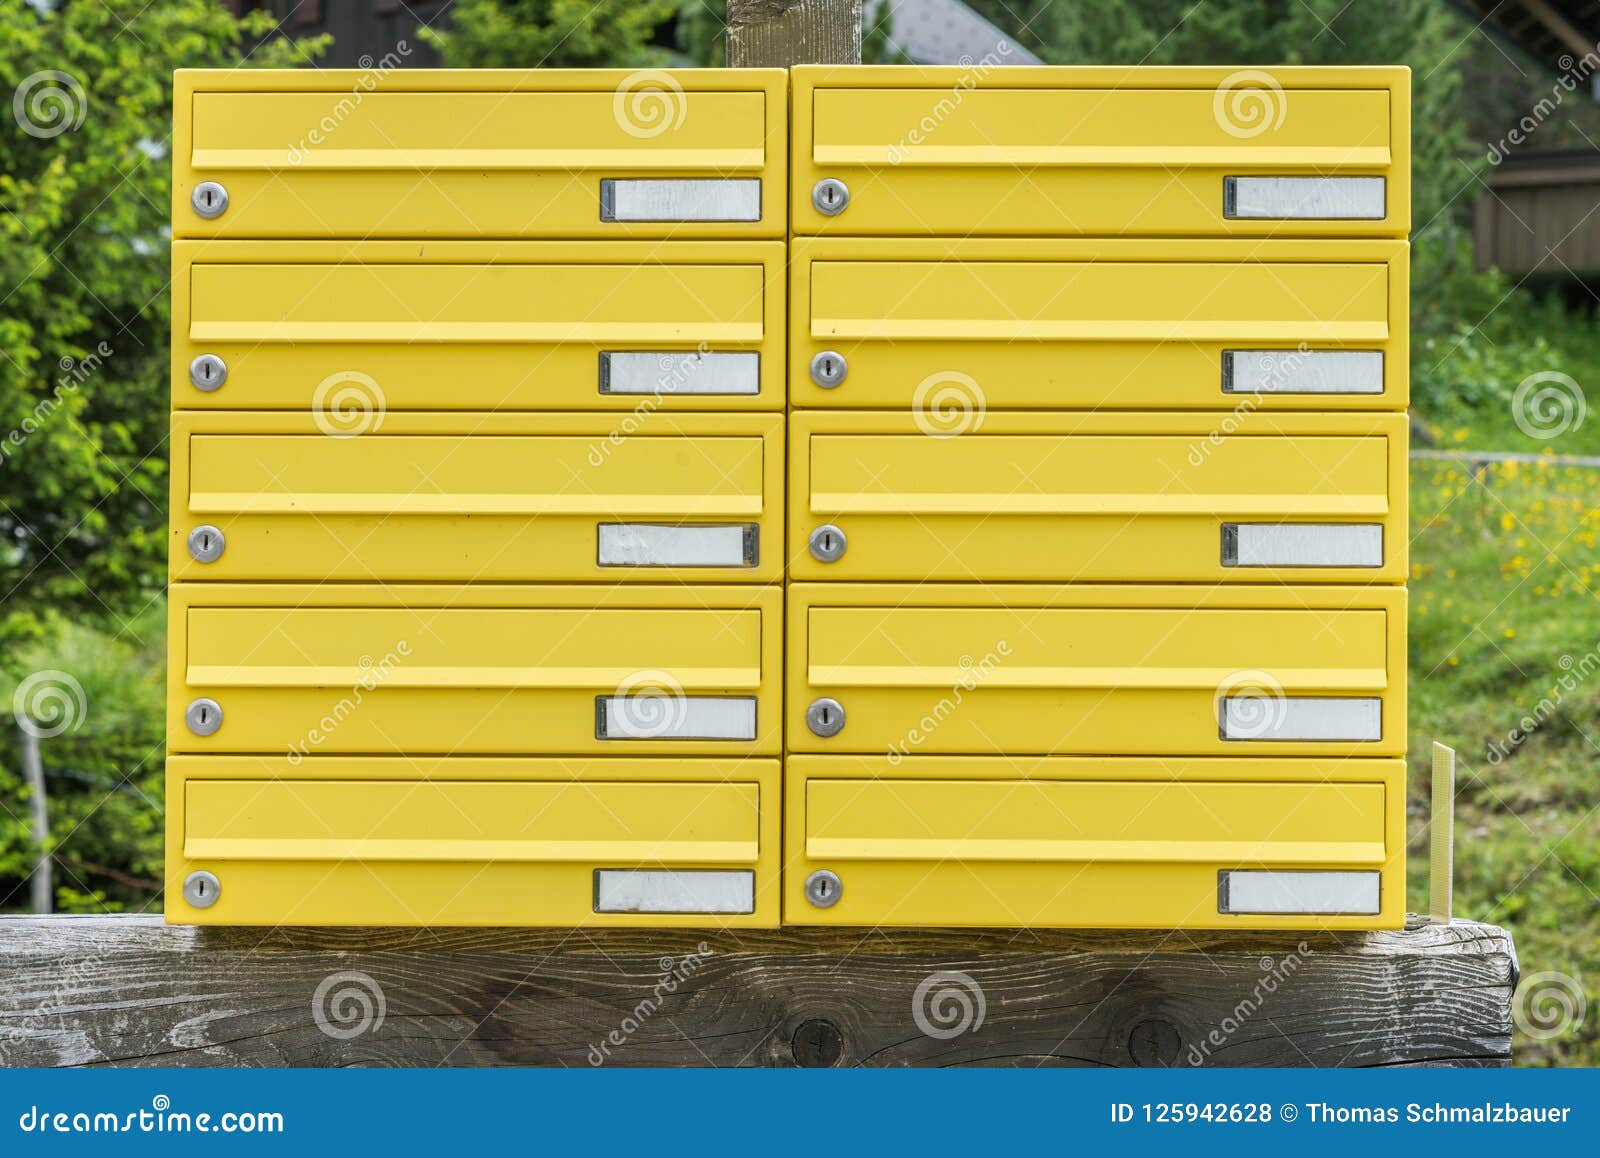 yellow letterbox made of tin without name in a rural area, austria